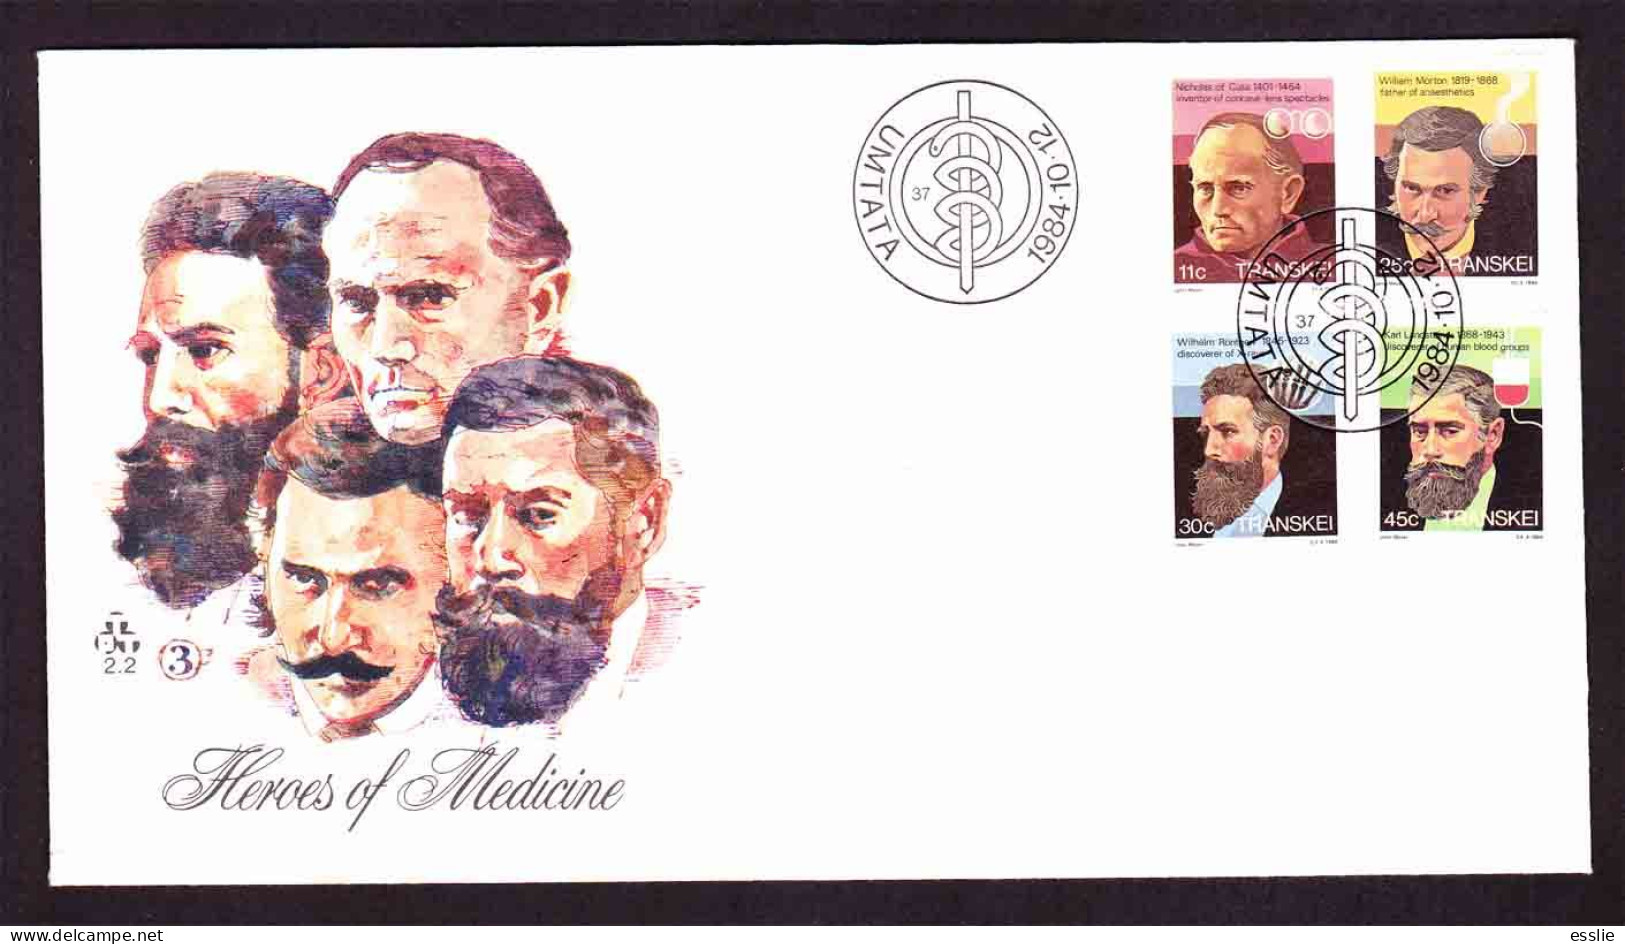 Transkei - 1984 - Heroes Of Medicine - First Day Cover - Small - Transkei